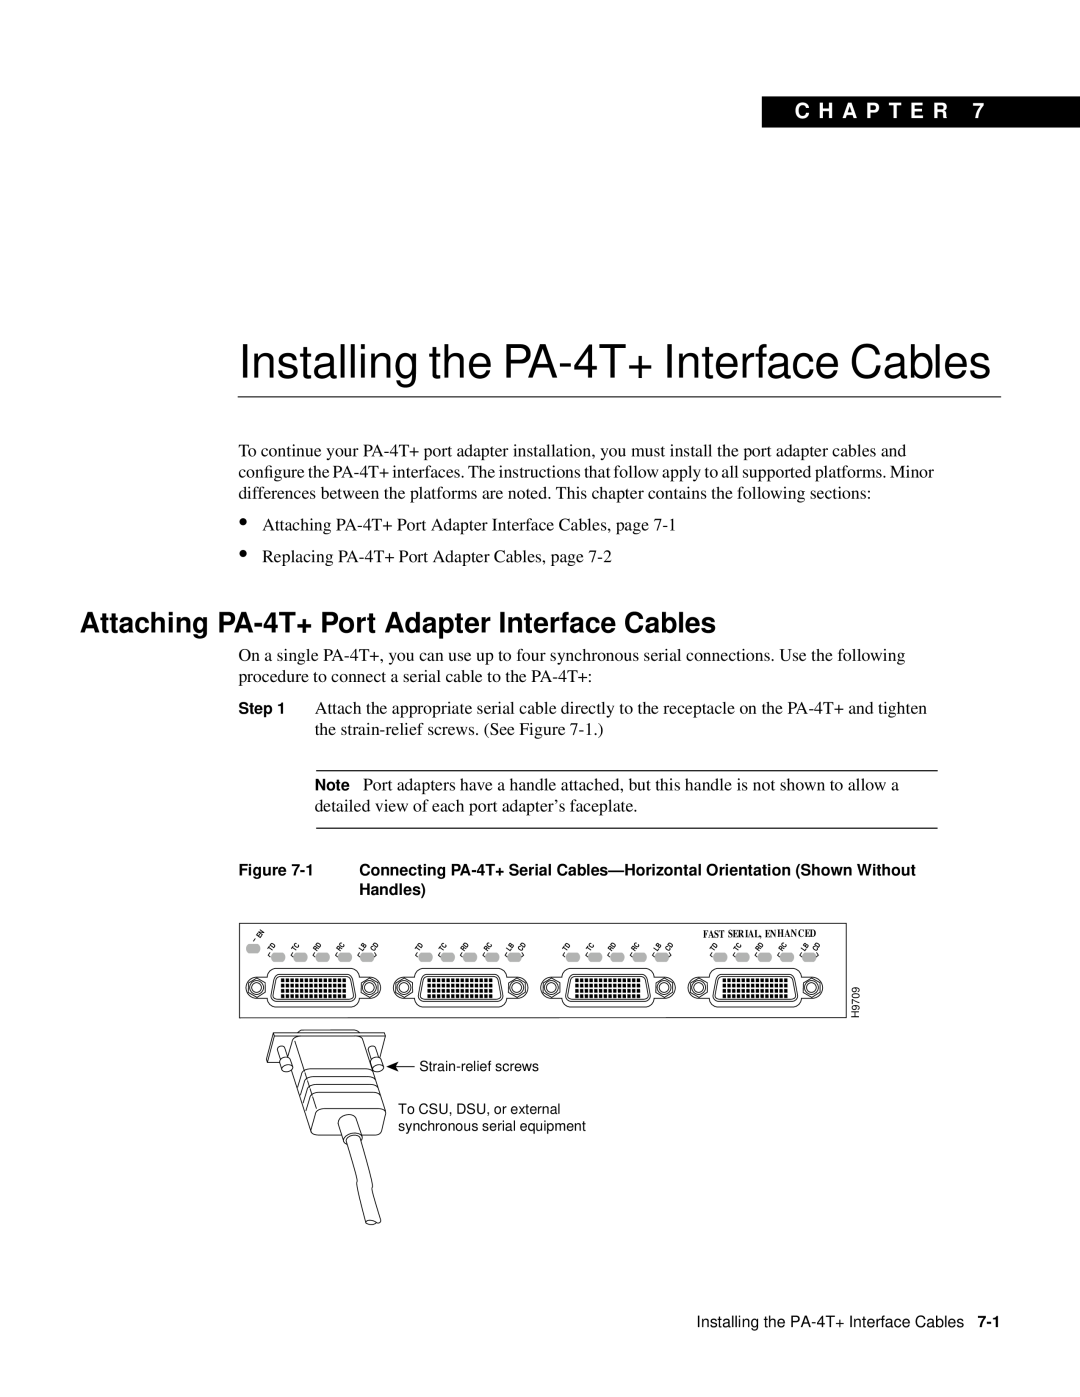 Cisco Systems Installing the PA-4T+ Interface Cables, Attaching PA-4T+ Port Adapter Interface Cables, C H A P T E R 